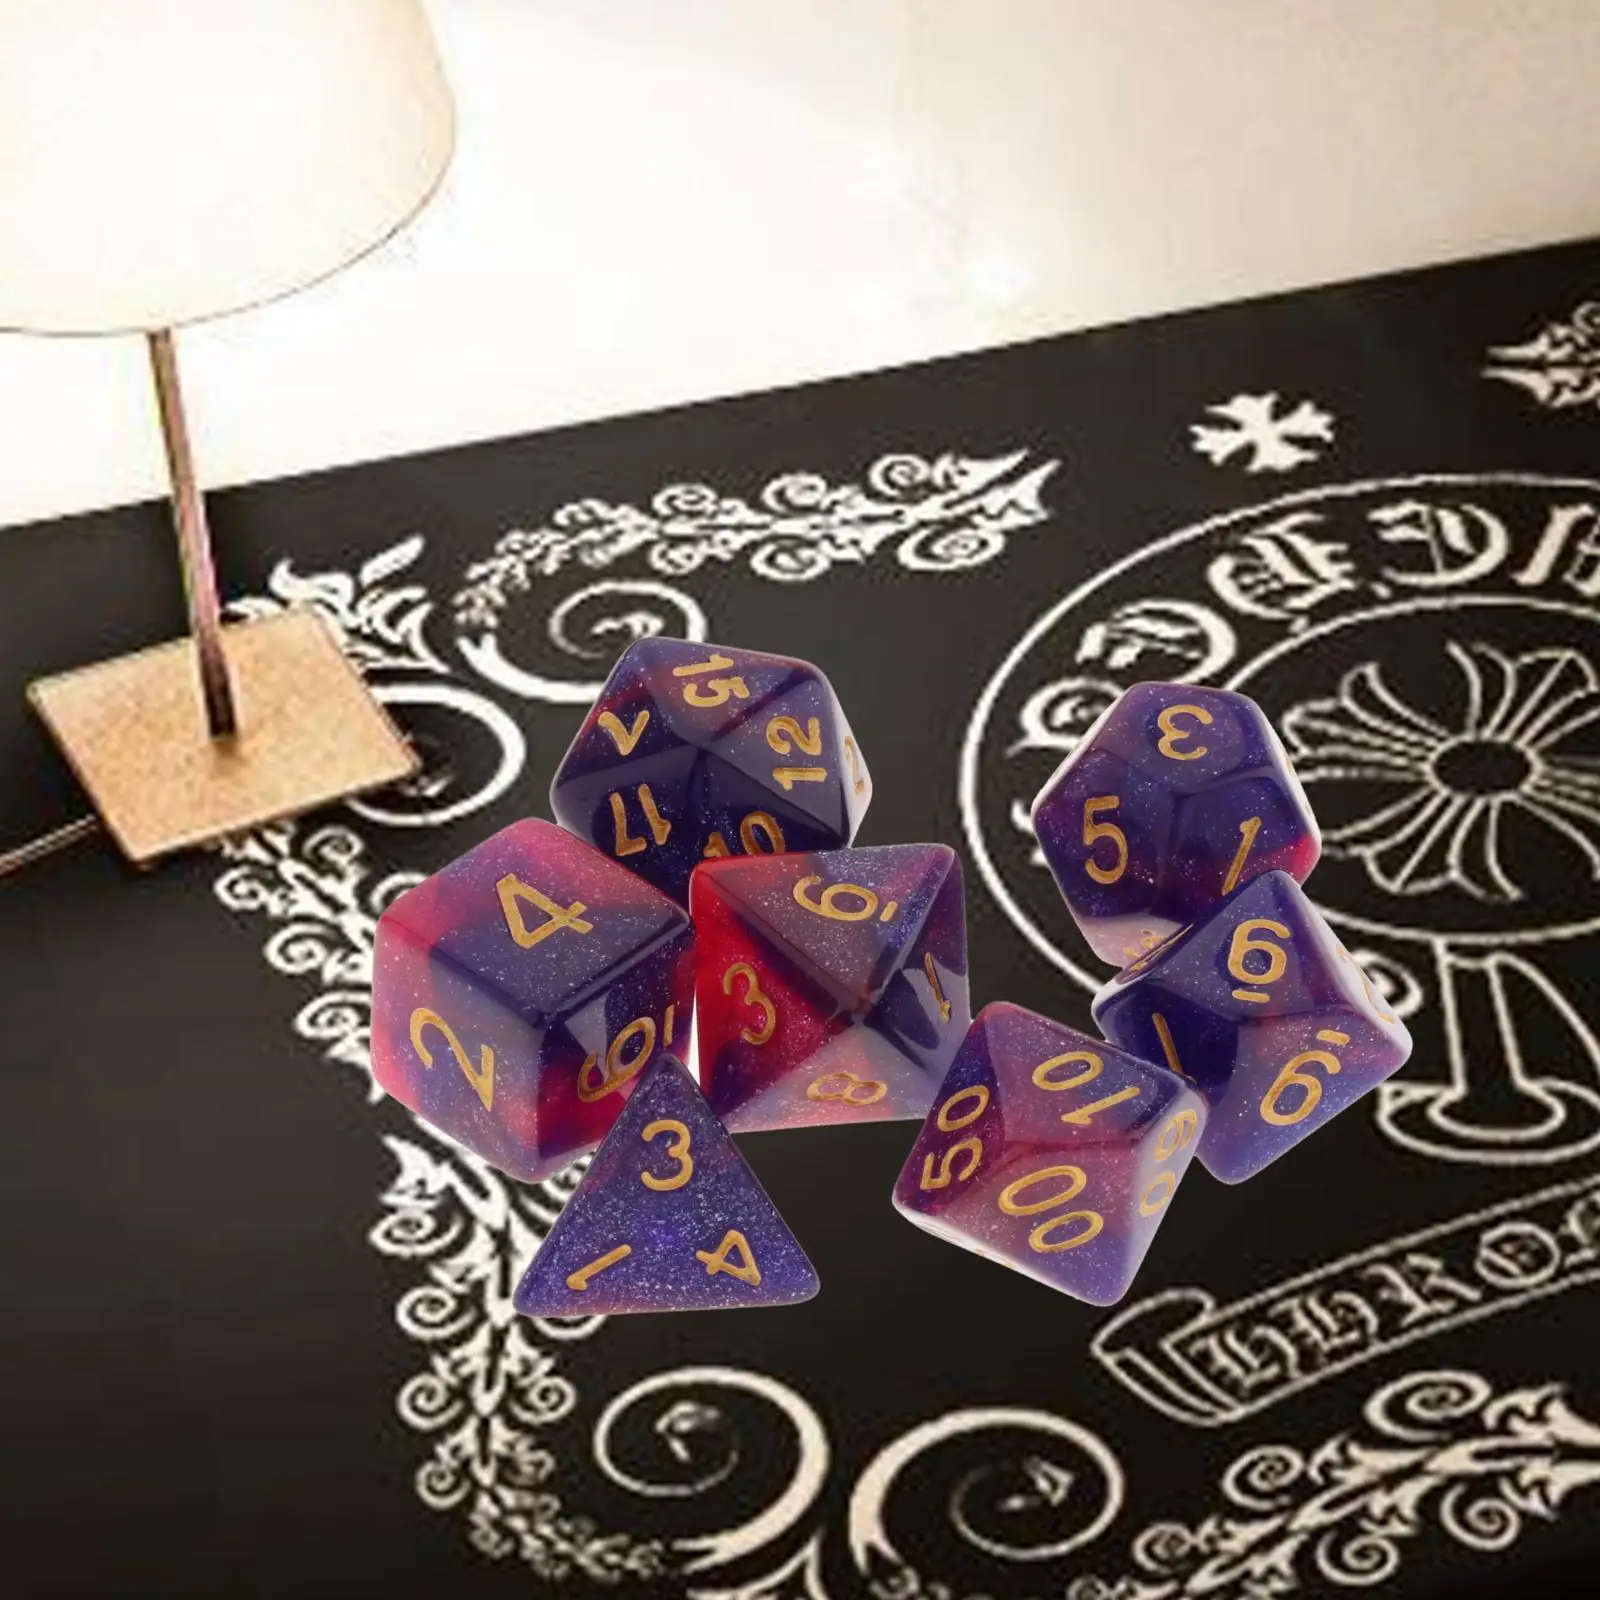 7x Multi-sided Digital Dice for MTG DND RPG Role Play Casino Board Game Toy